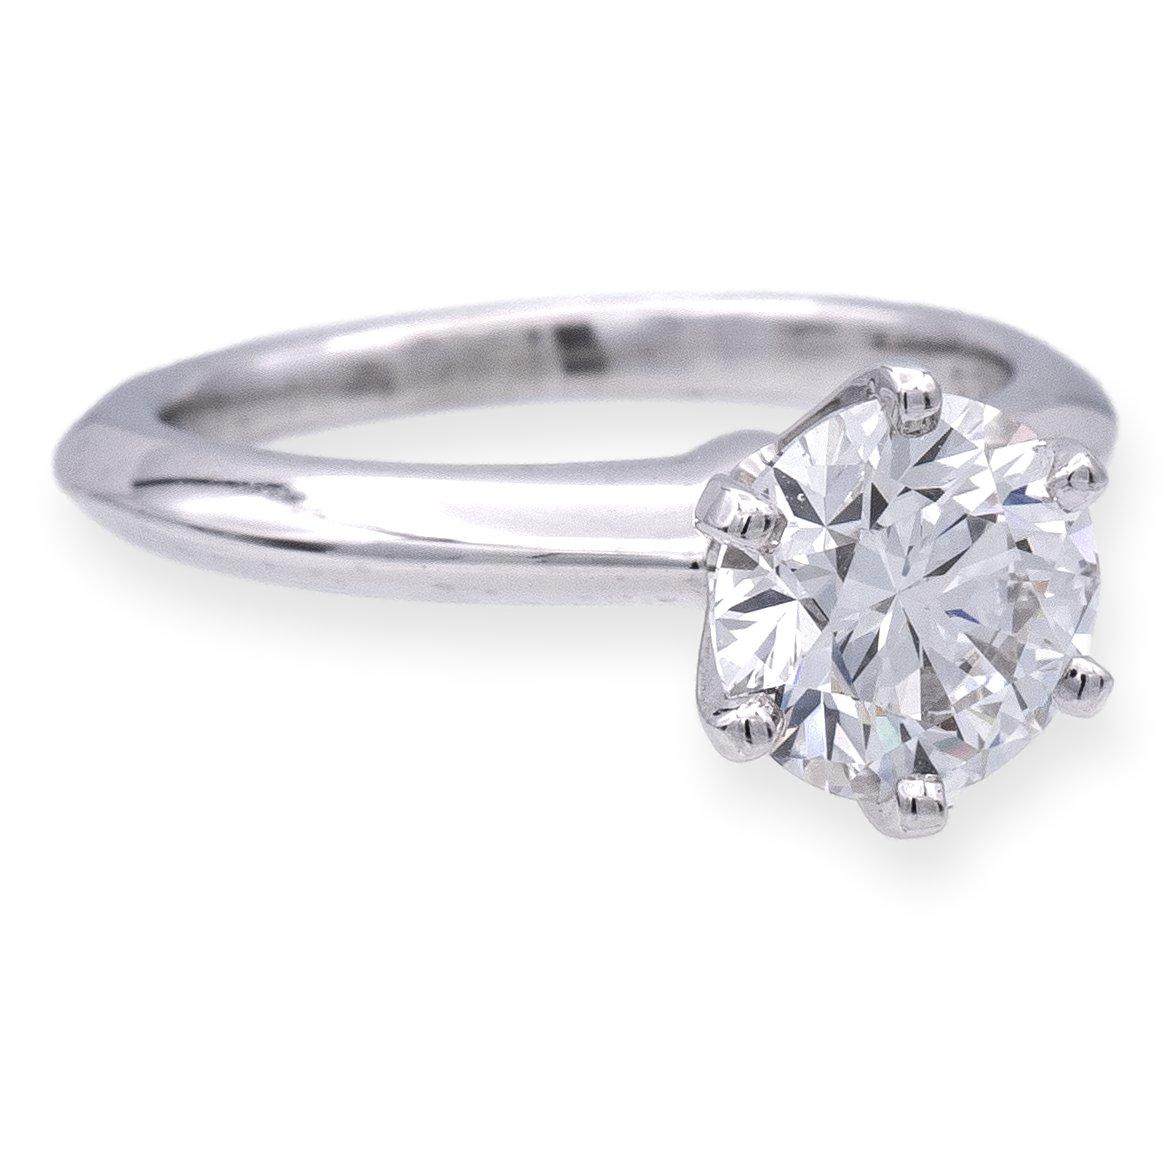 Tiffany & Co. Classic Diamond Engagement Ring crafted with precision in a six-prong platinum setting, it showcases a brilliant 1.21 carat round diamond at its core. Graded F color and VS1 clarity, the diamond's beauty is enhanced by its Excellent